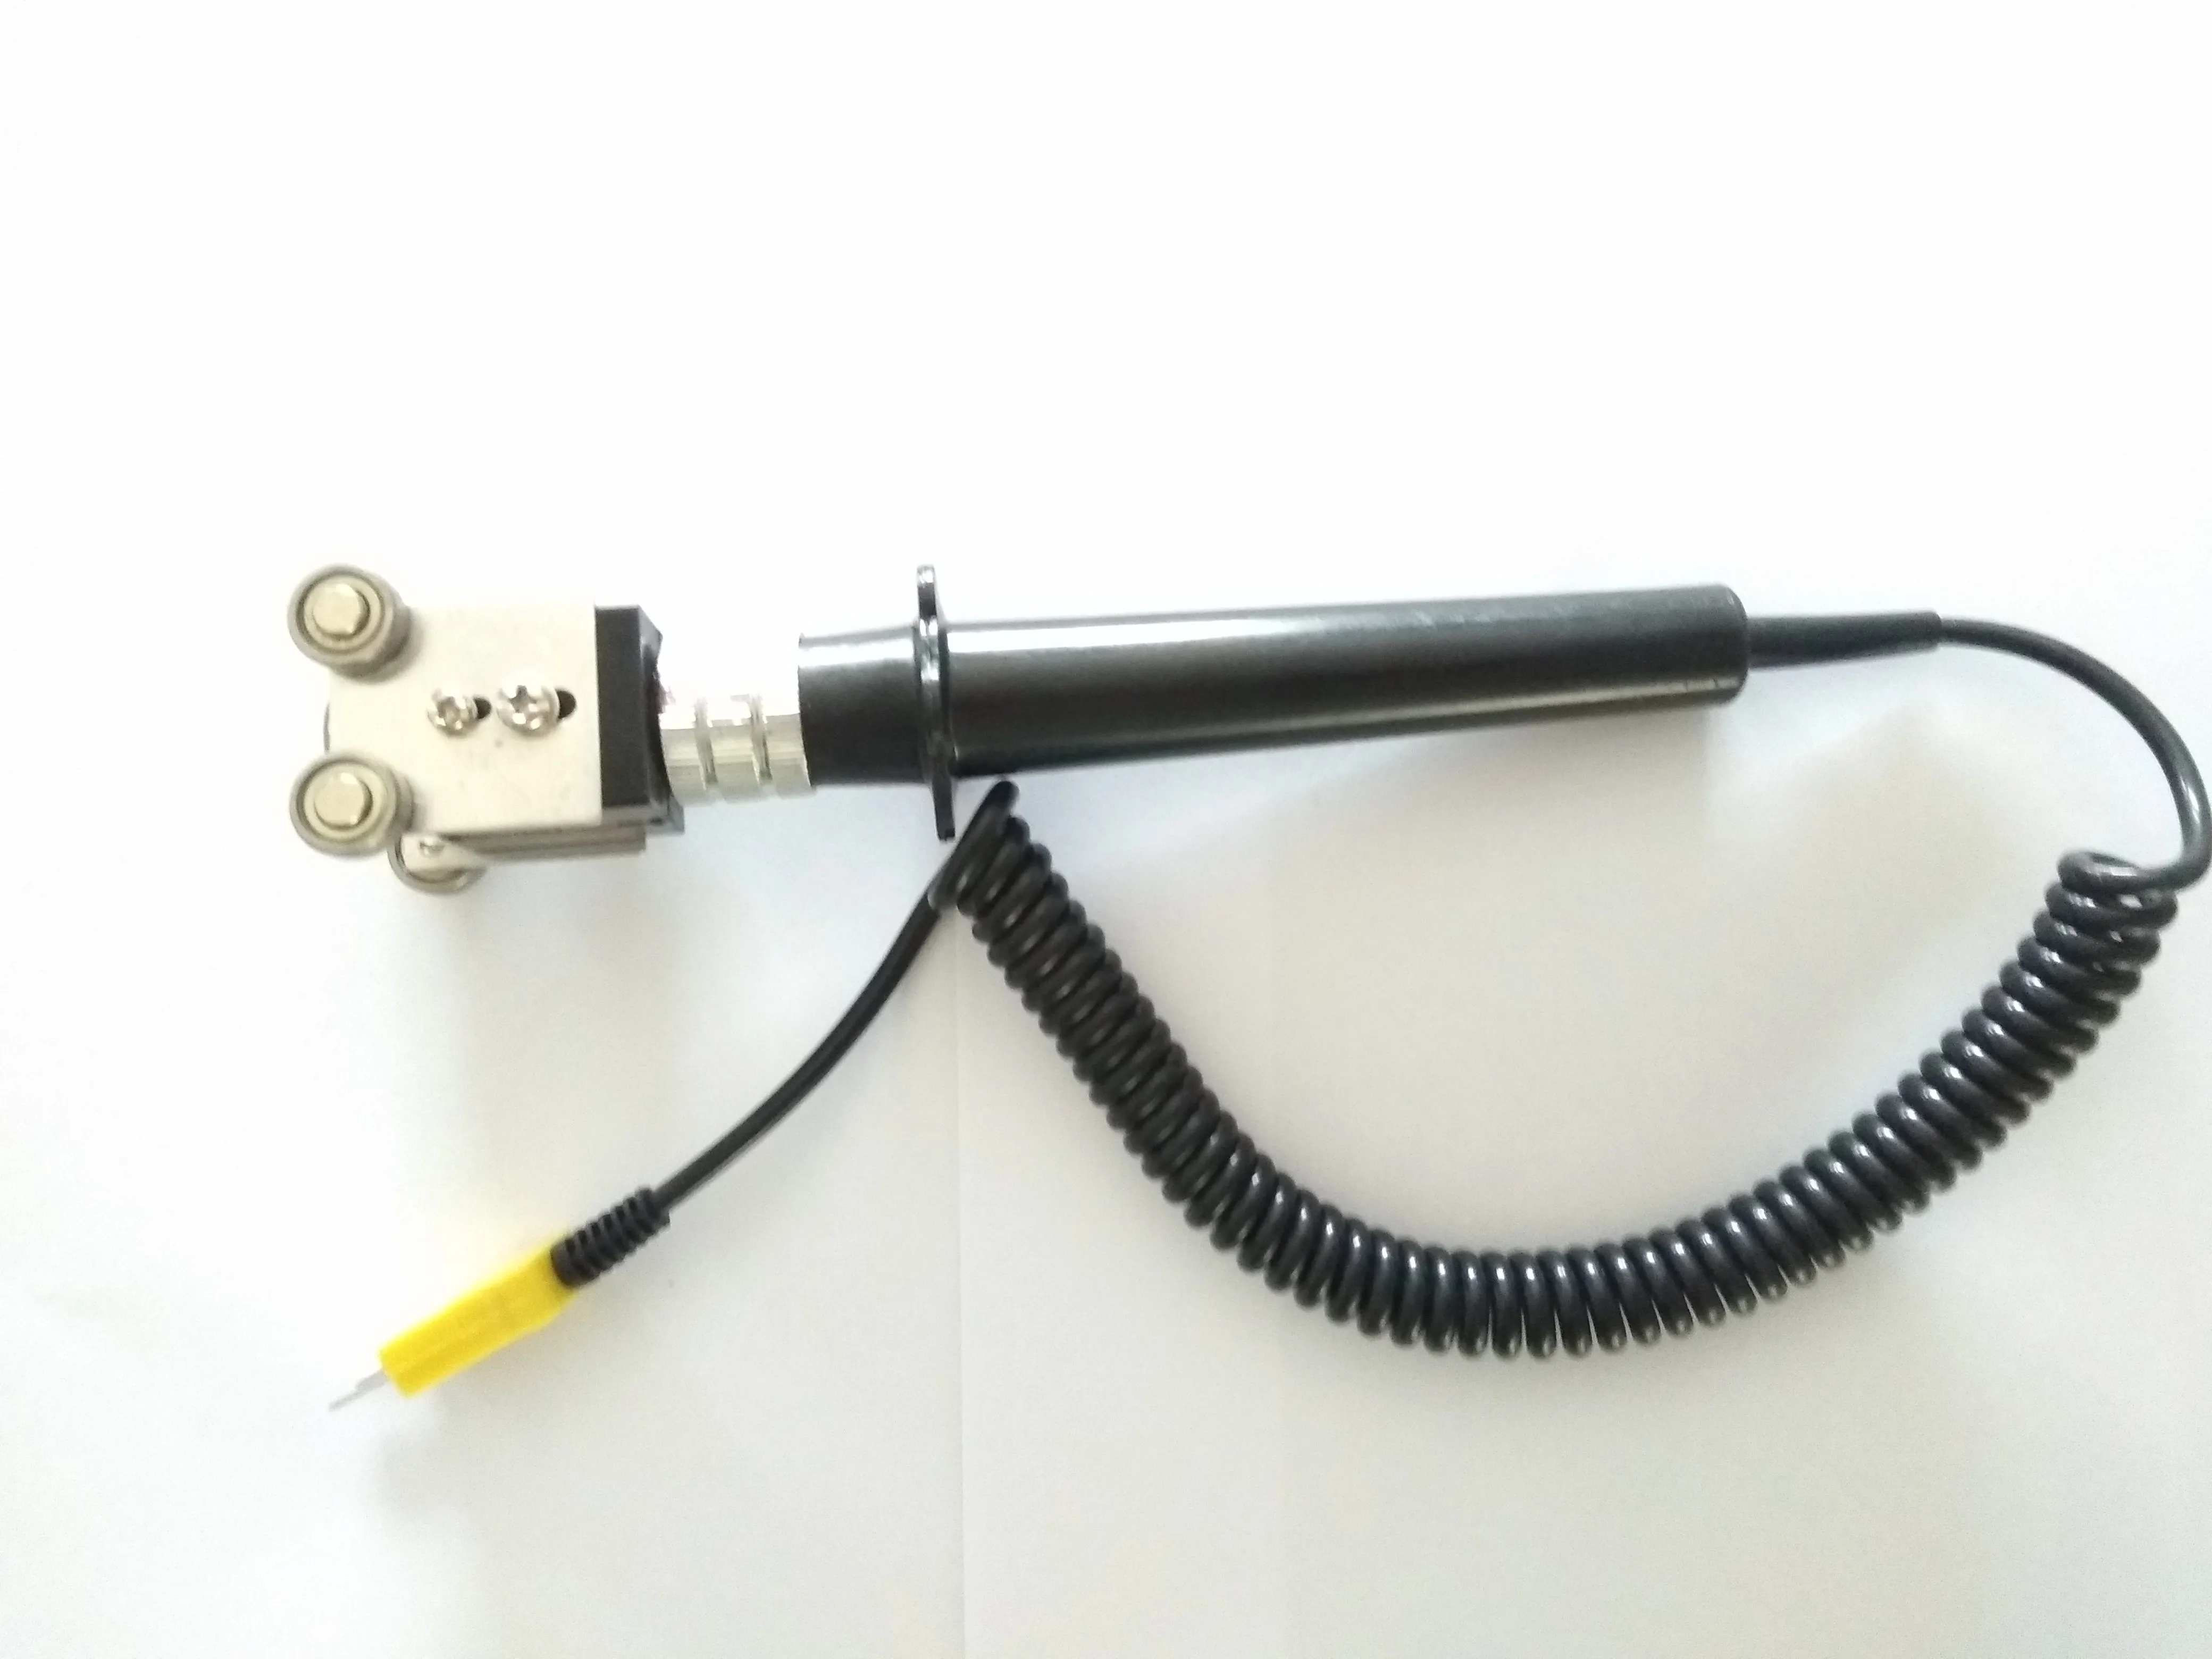 JVTIA k type thermocouple probe owner for temperature measurement and control-8